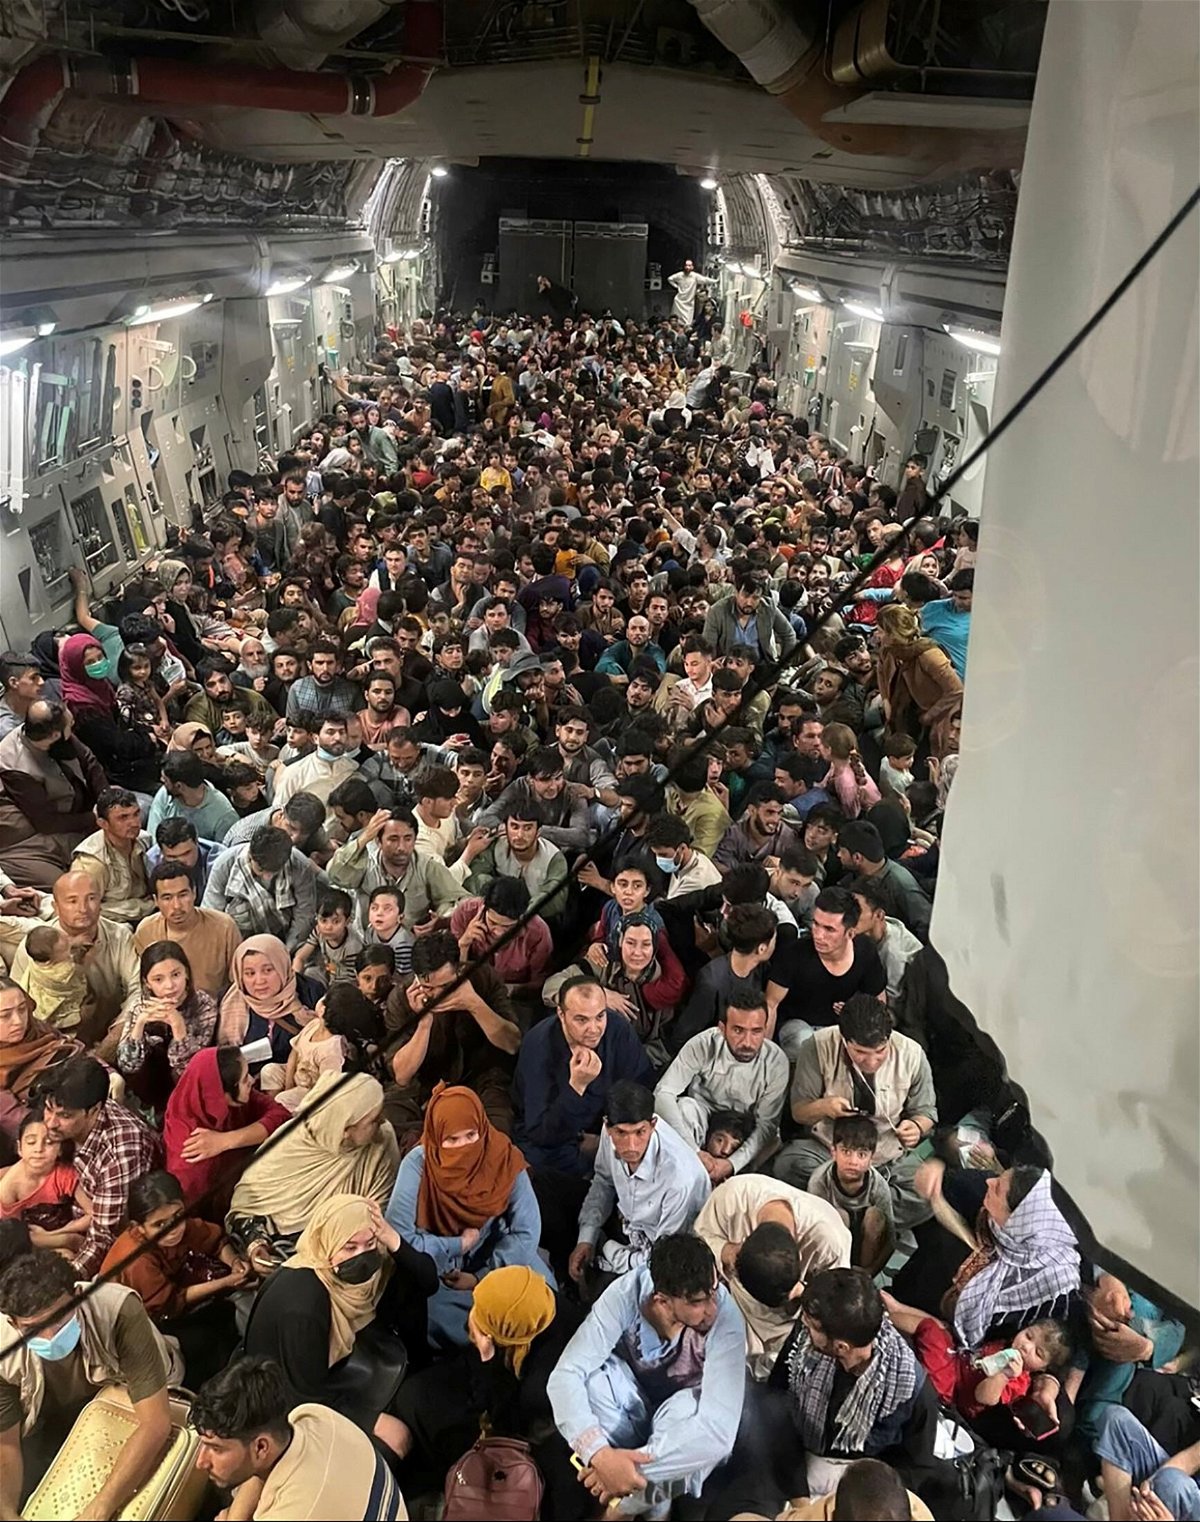 <i>Courtesy of Defense One/Reuters</i><br/>Afghan evacuees crowd the interior of a U.S. Air Force C-17 transport aircraft on its way from Kabul to Qatar on August 15.